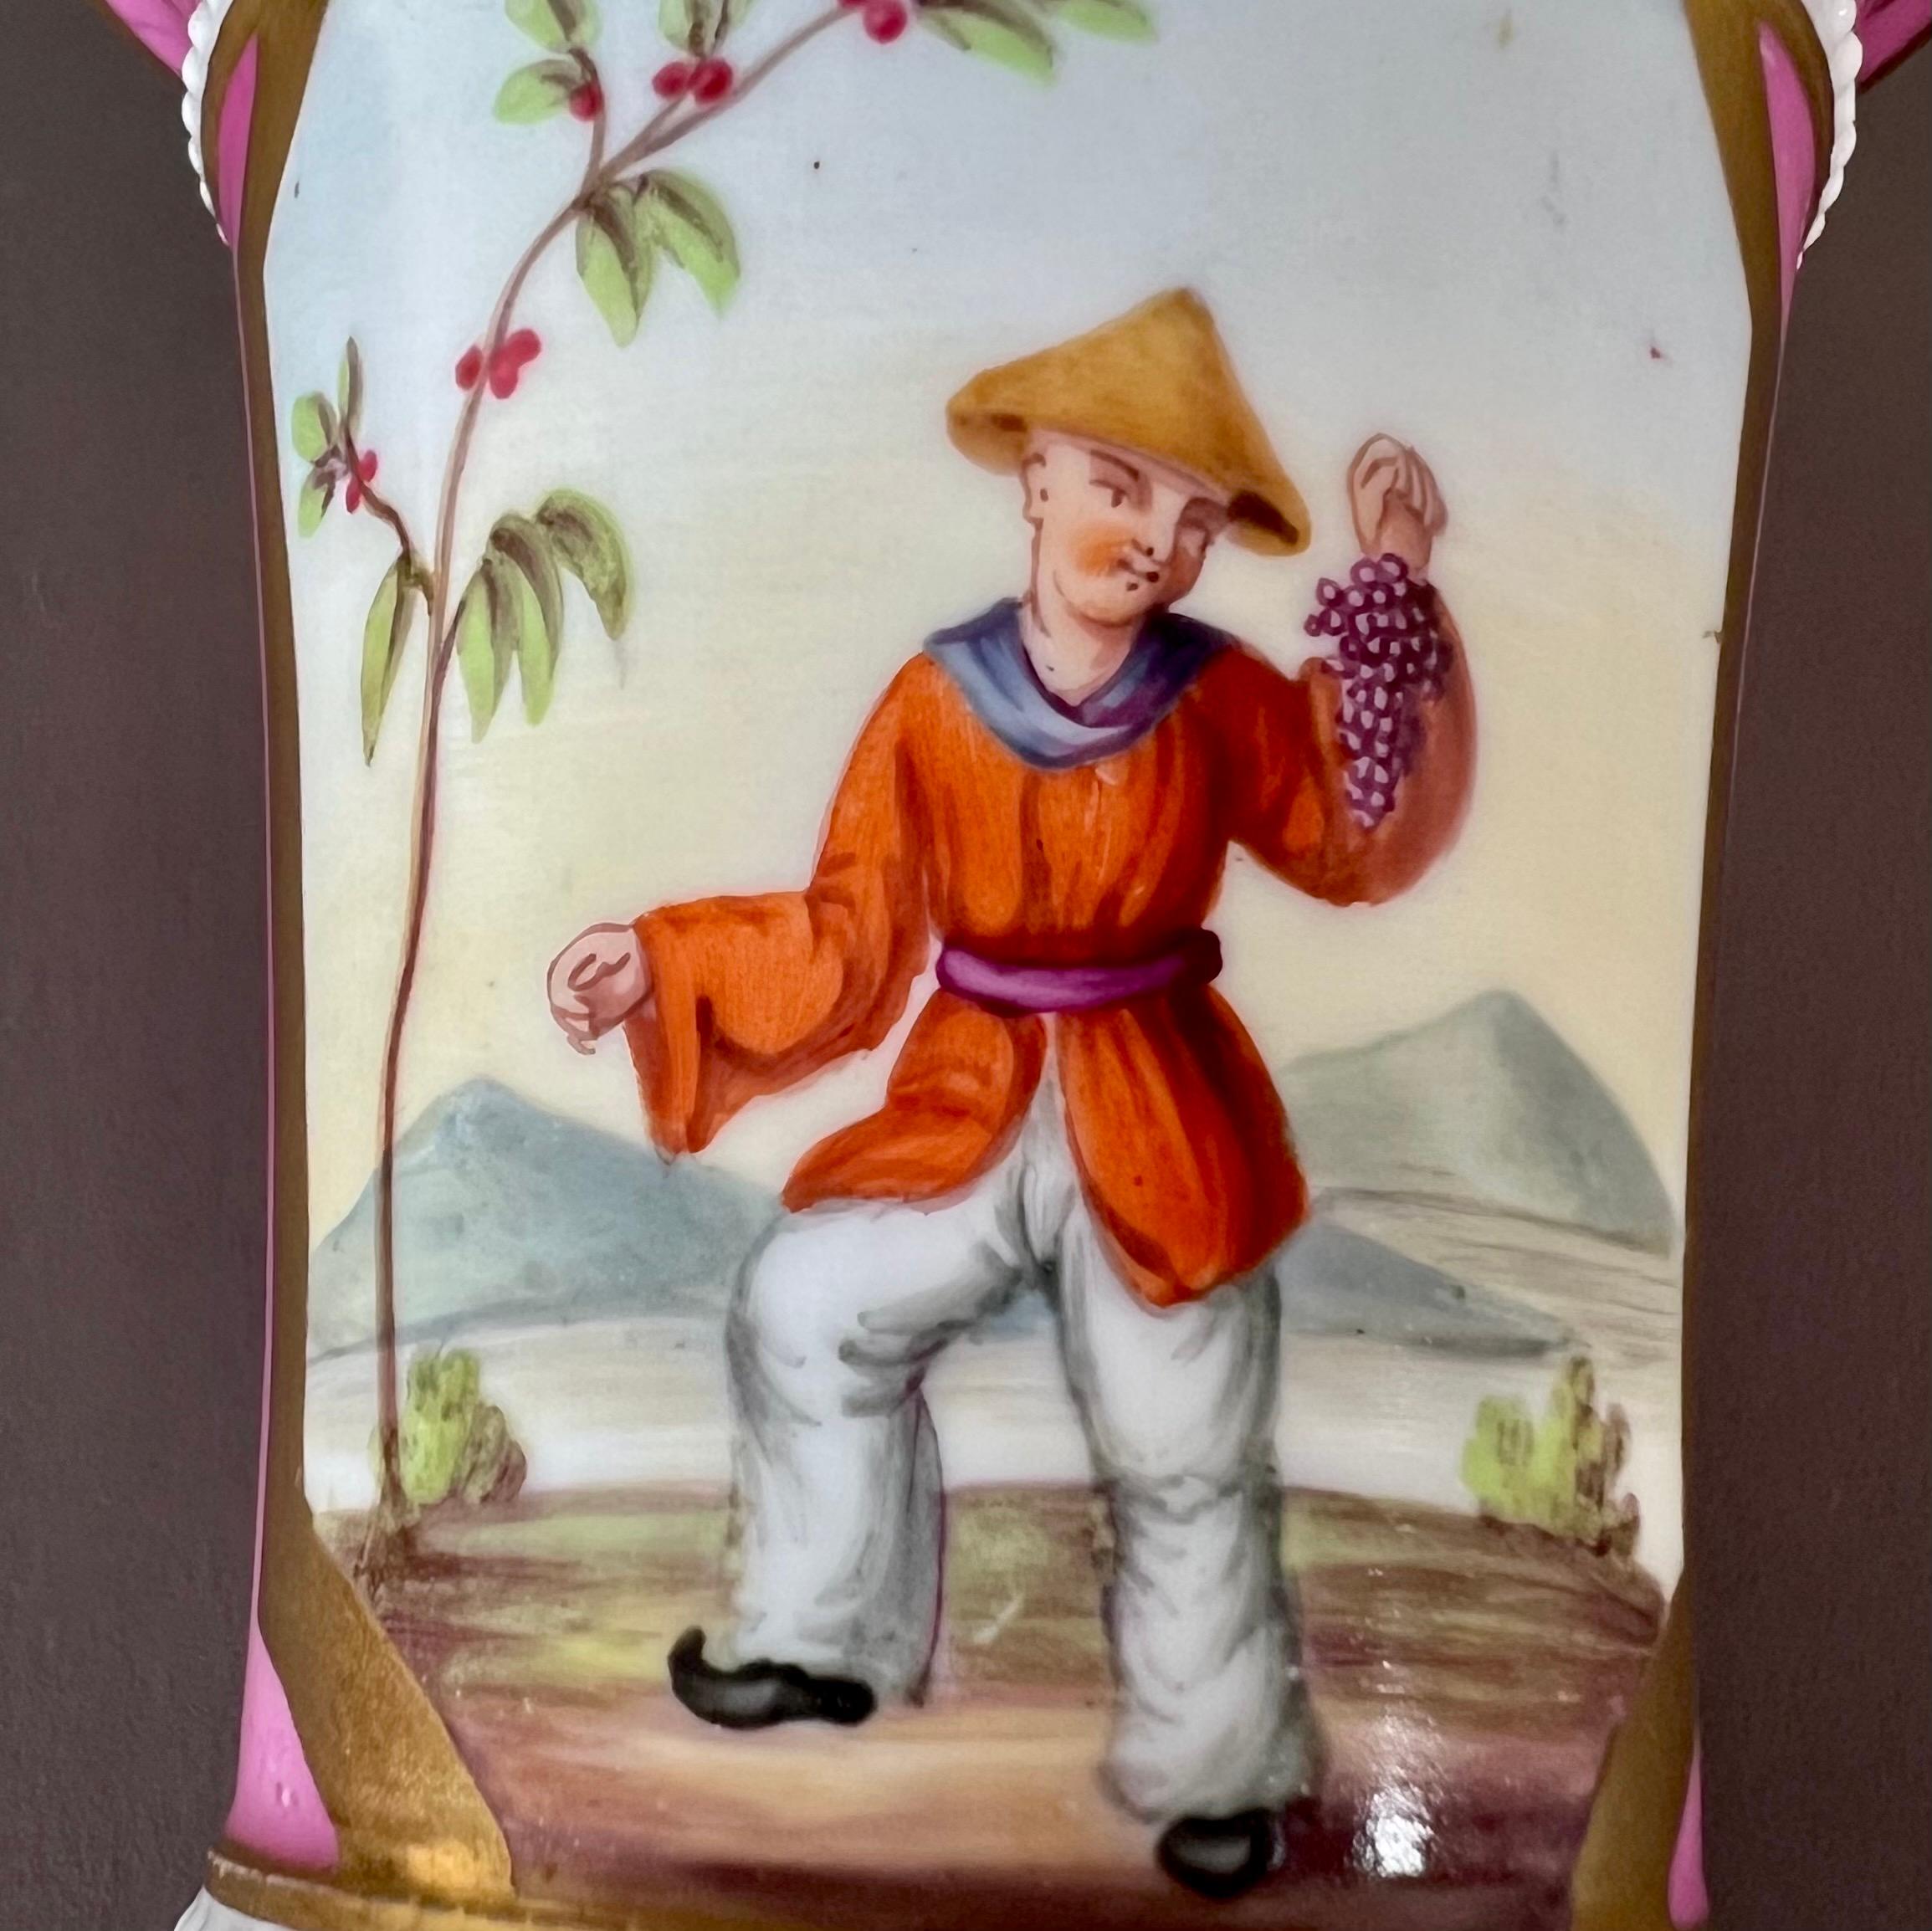 English Pair of Samuel Alcock Porcelain Spill Vases, Pink Chinoiserie Figures, ca 1825